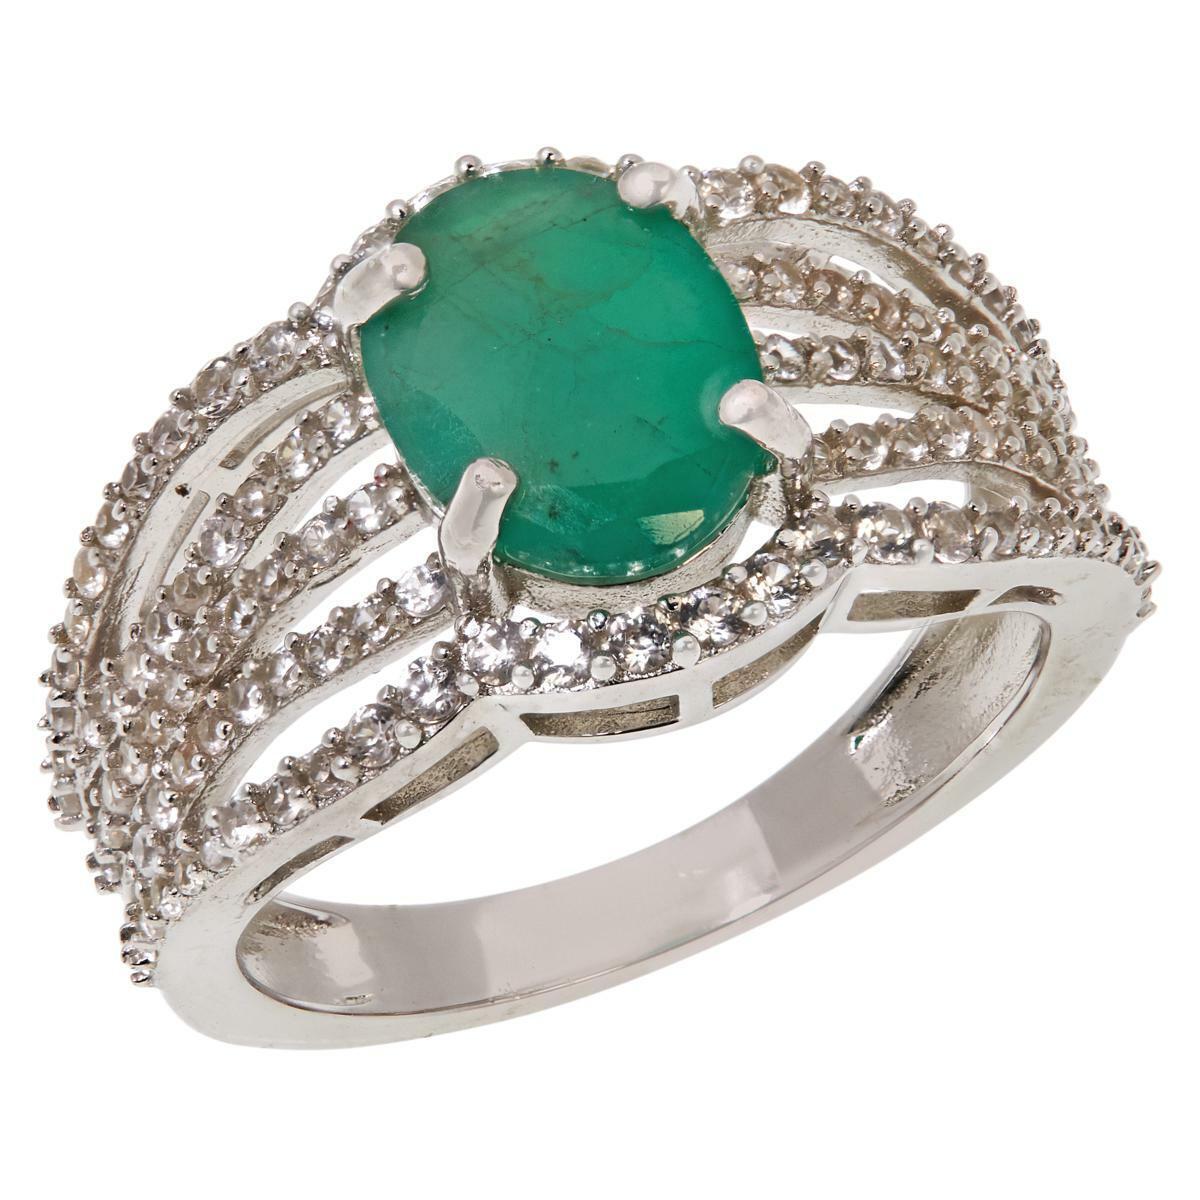 Colleen Lopez Sterling Silver Emerald and White Zircon Ring, Size 6